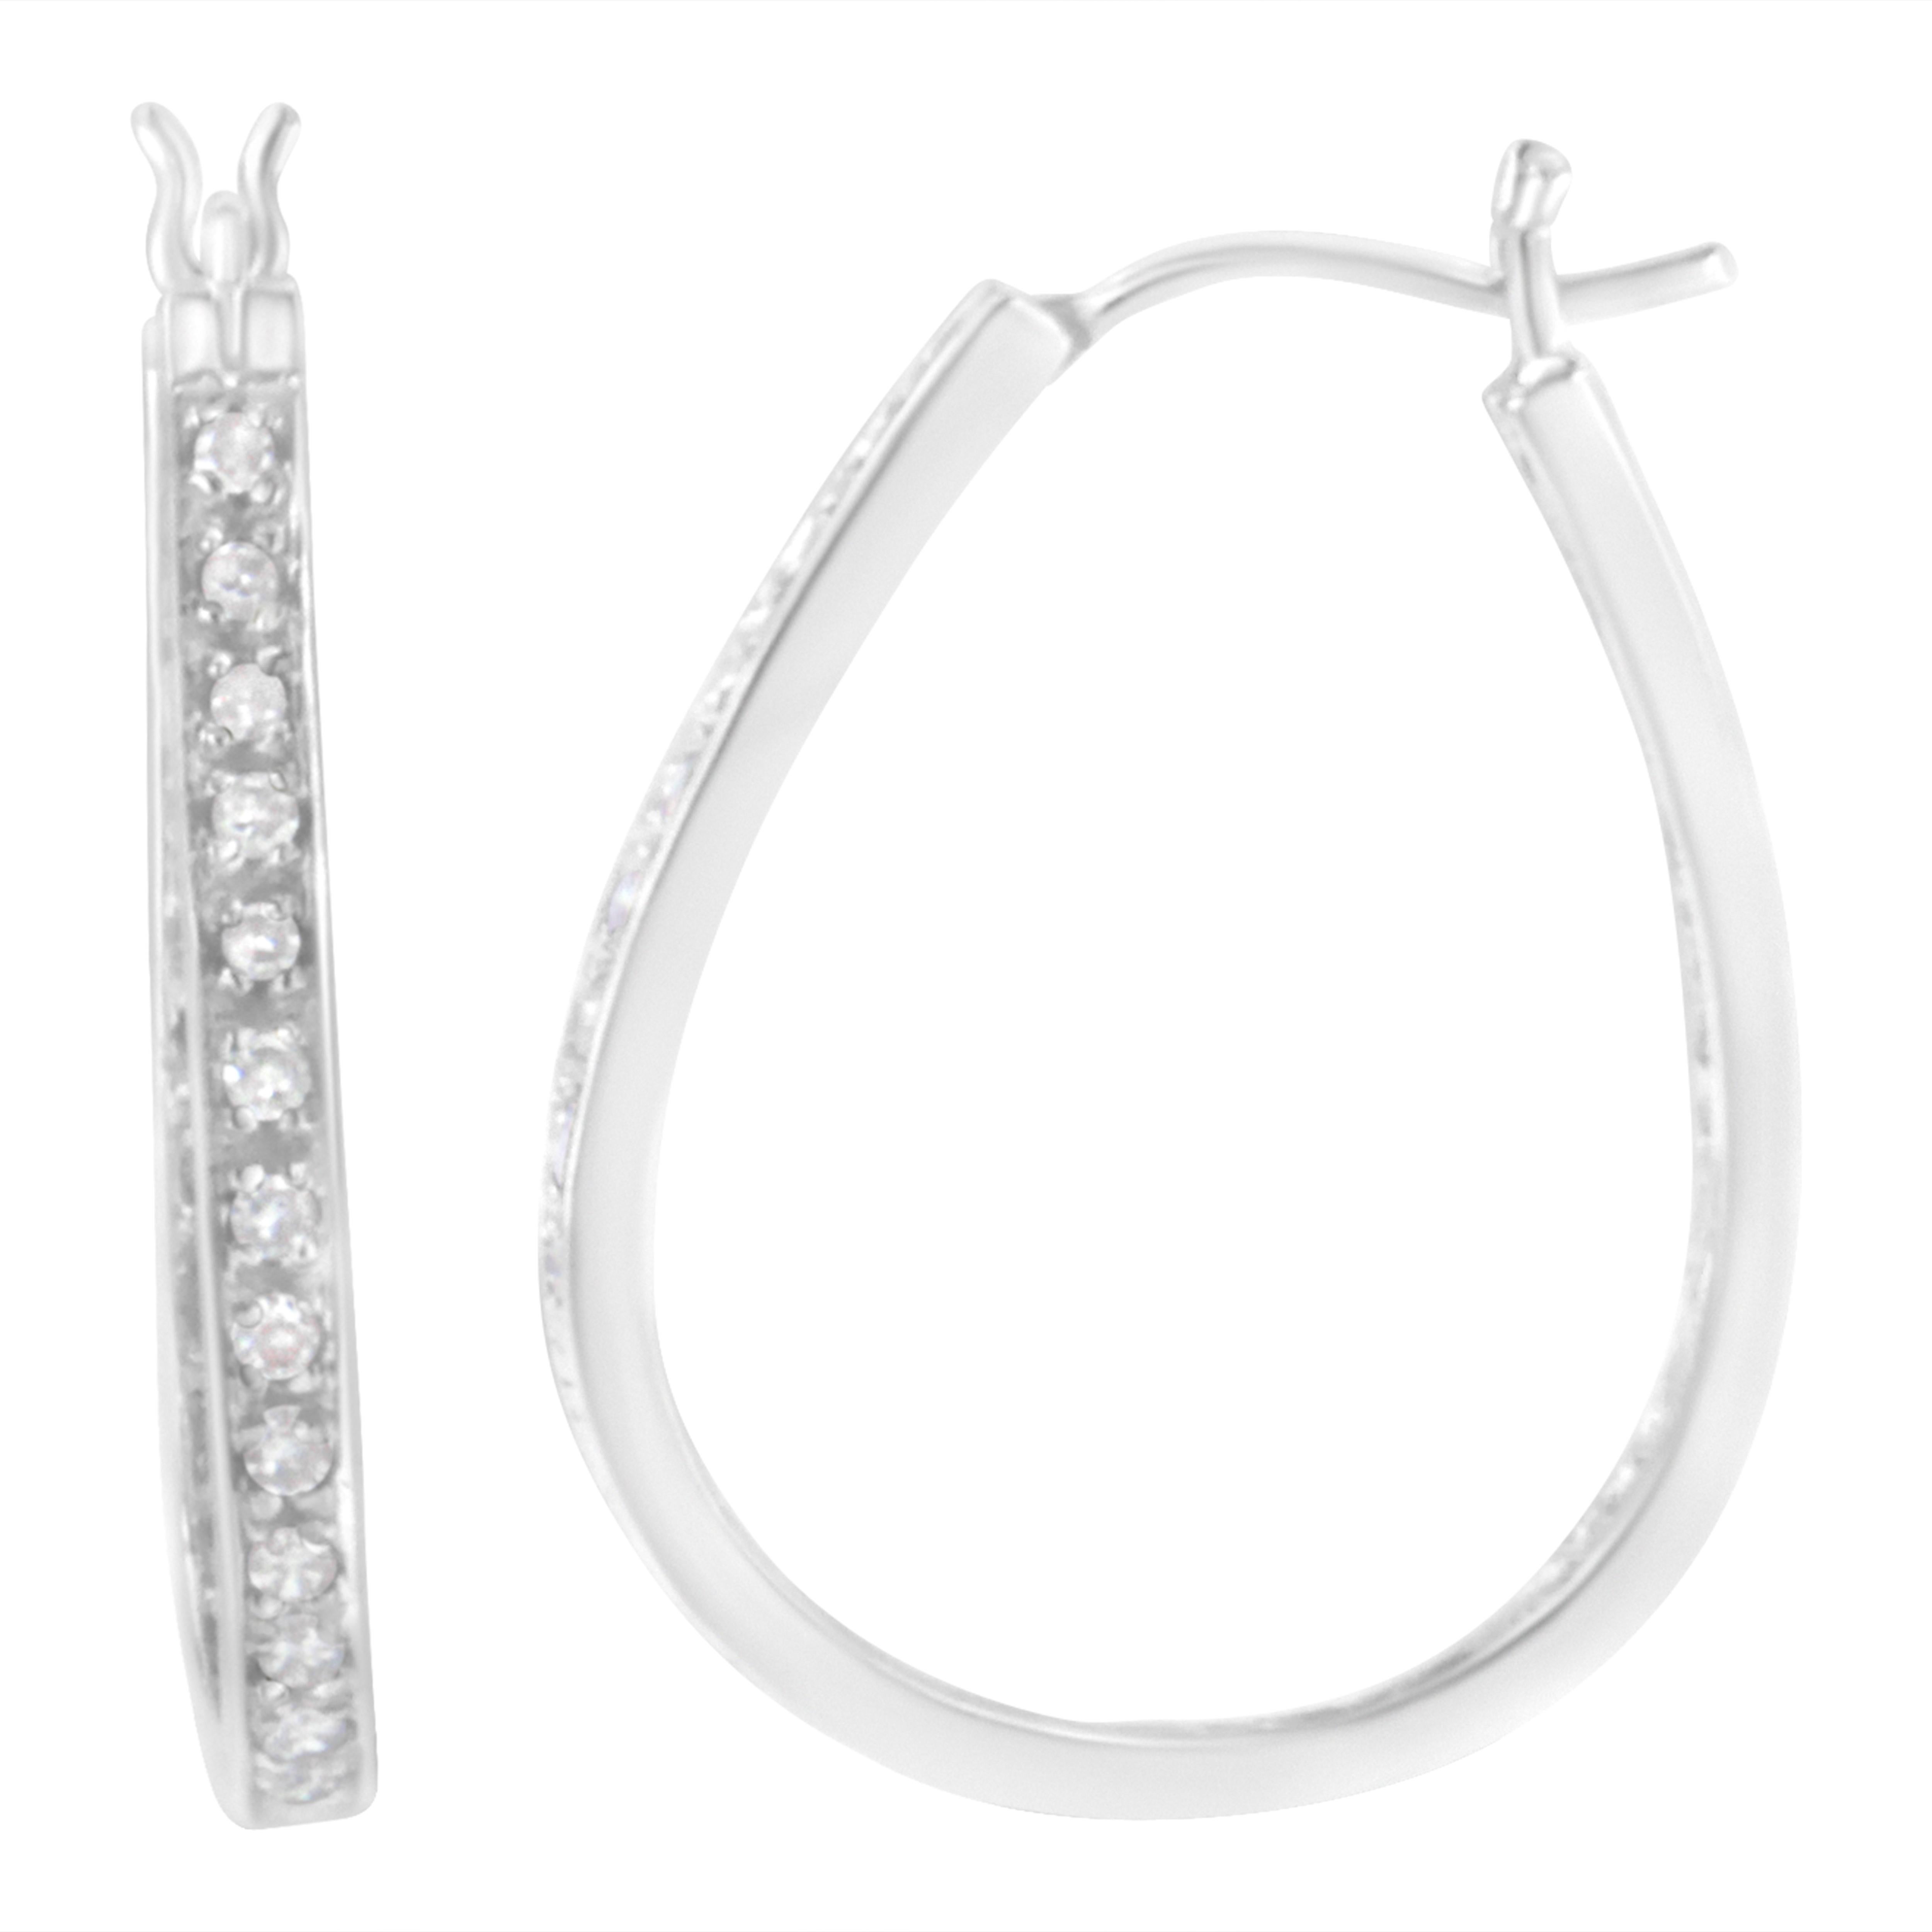 Beautiful, natural round-cut diamonds embellish the outer and inner layer of these stunning 10k white gold hoop earrings. This piece has a total diamond weight of a 1/2 cttw, and is the perfect gift for a loved one. The diamonds shine in a prong